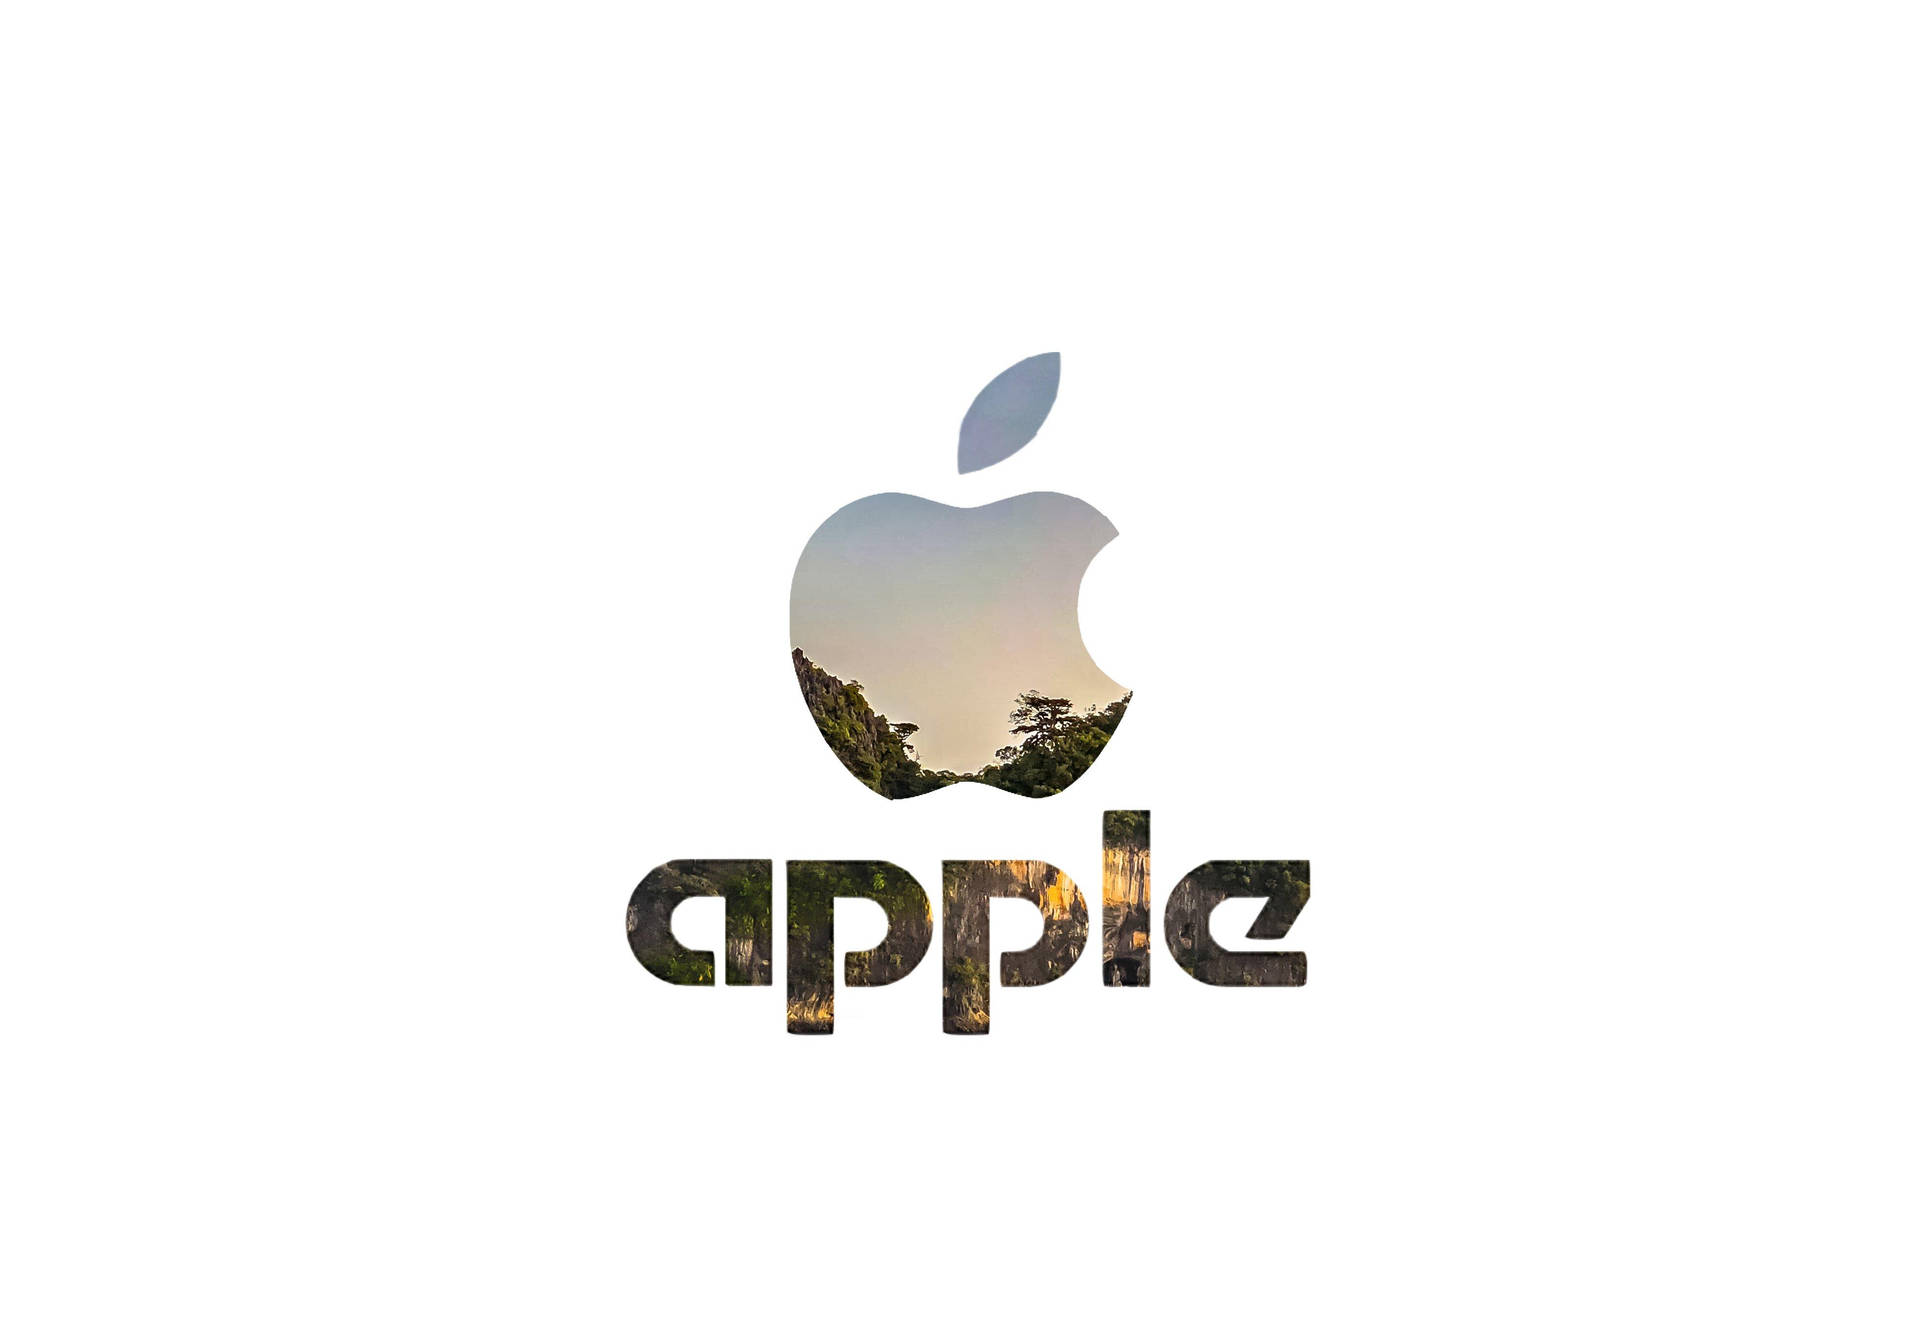 3922X2727 Apple Logo Wallpaper and Background